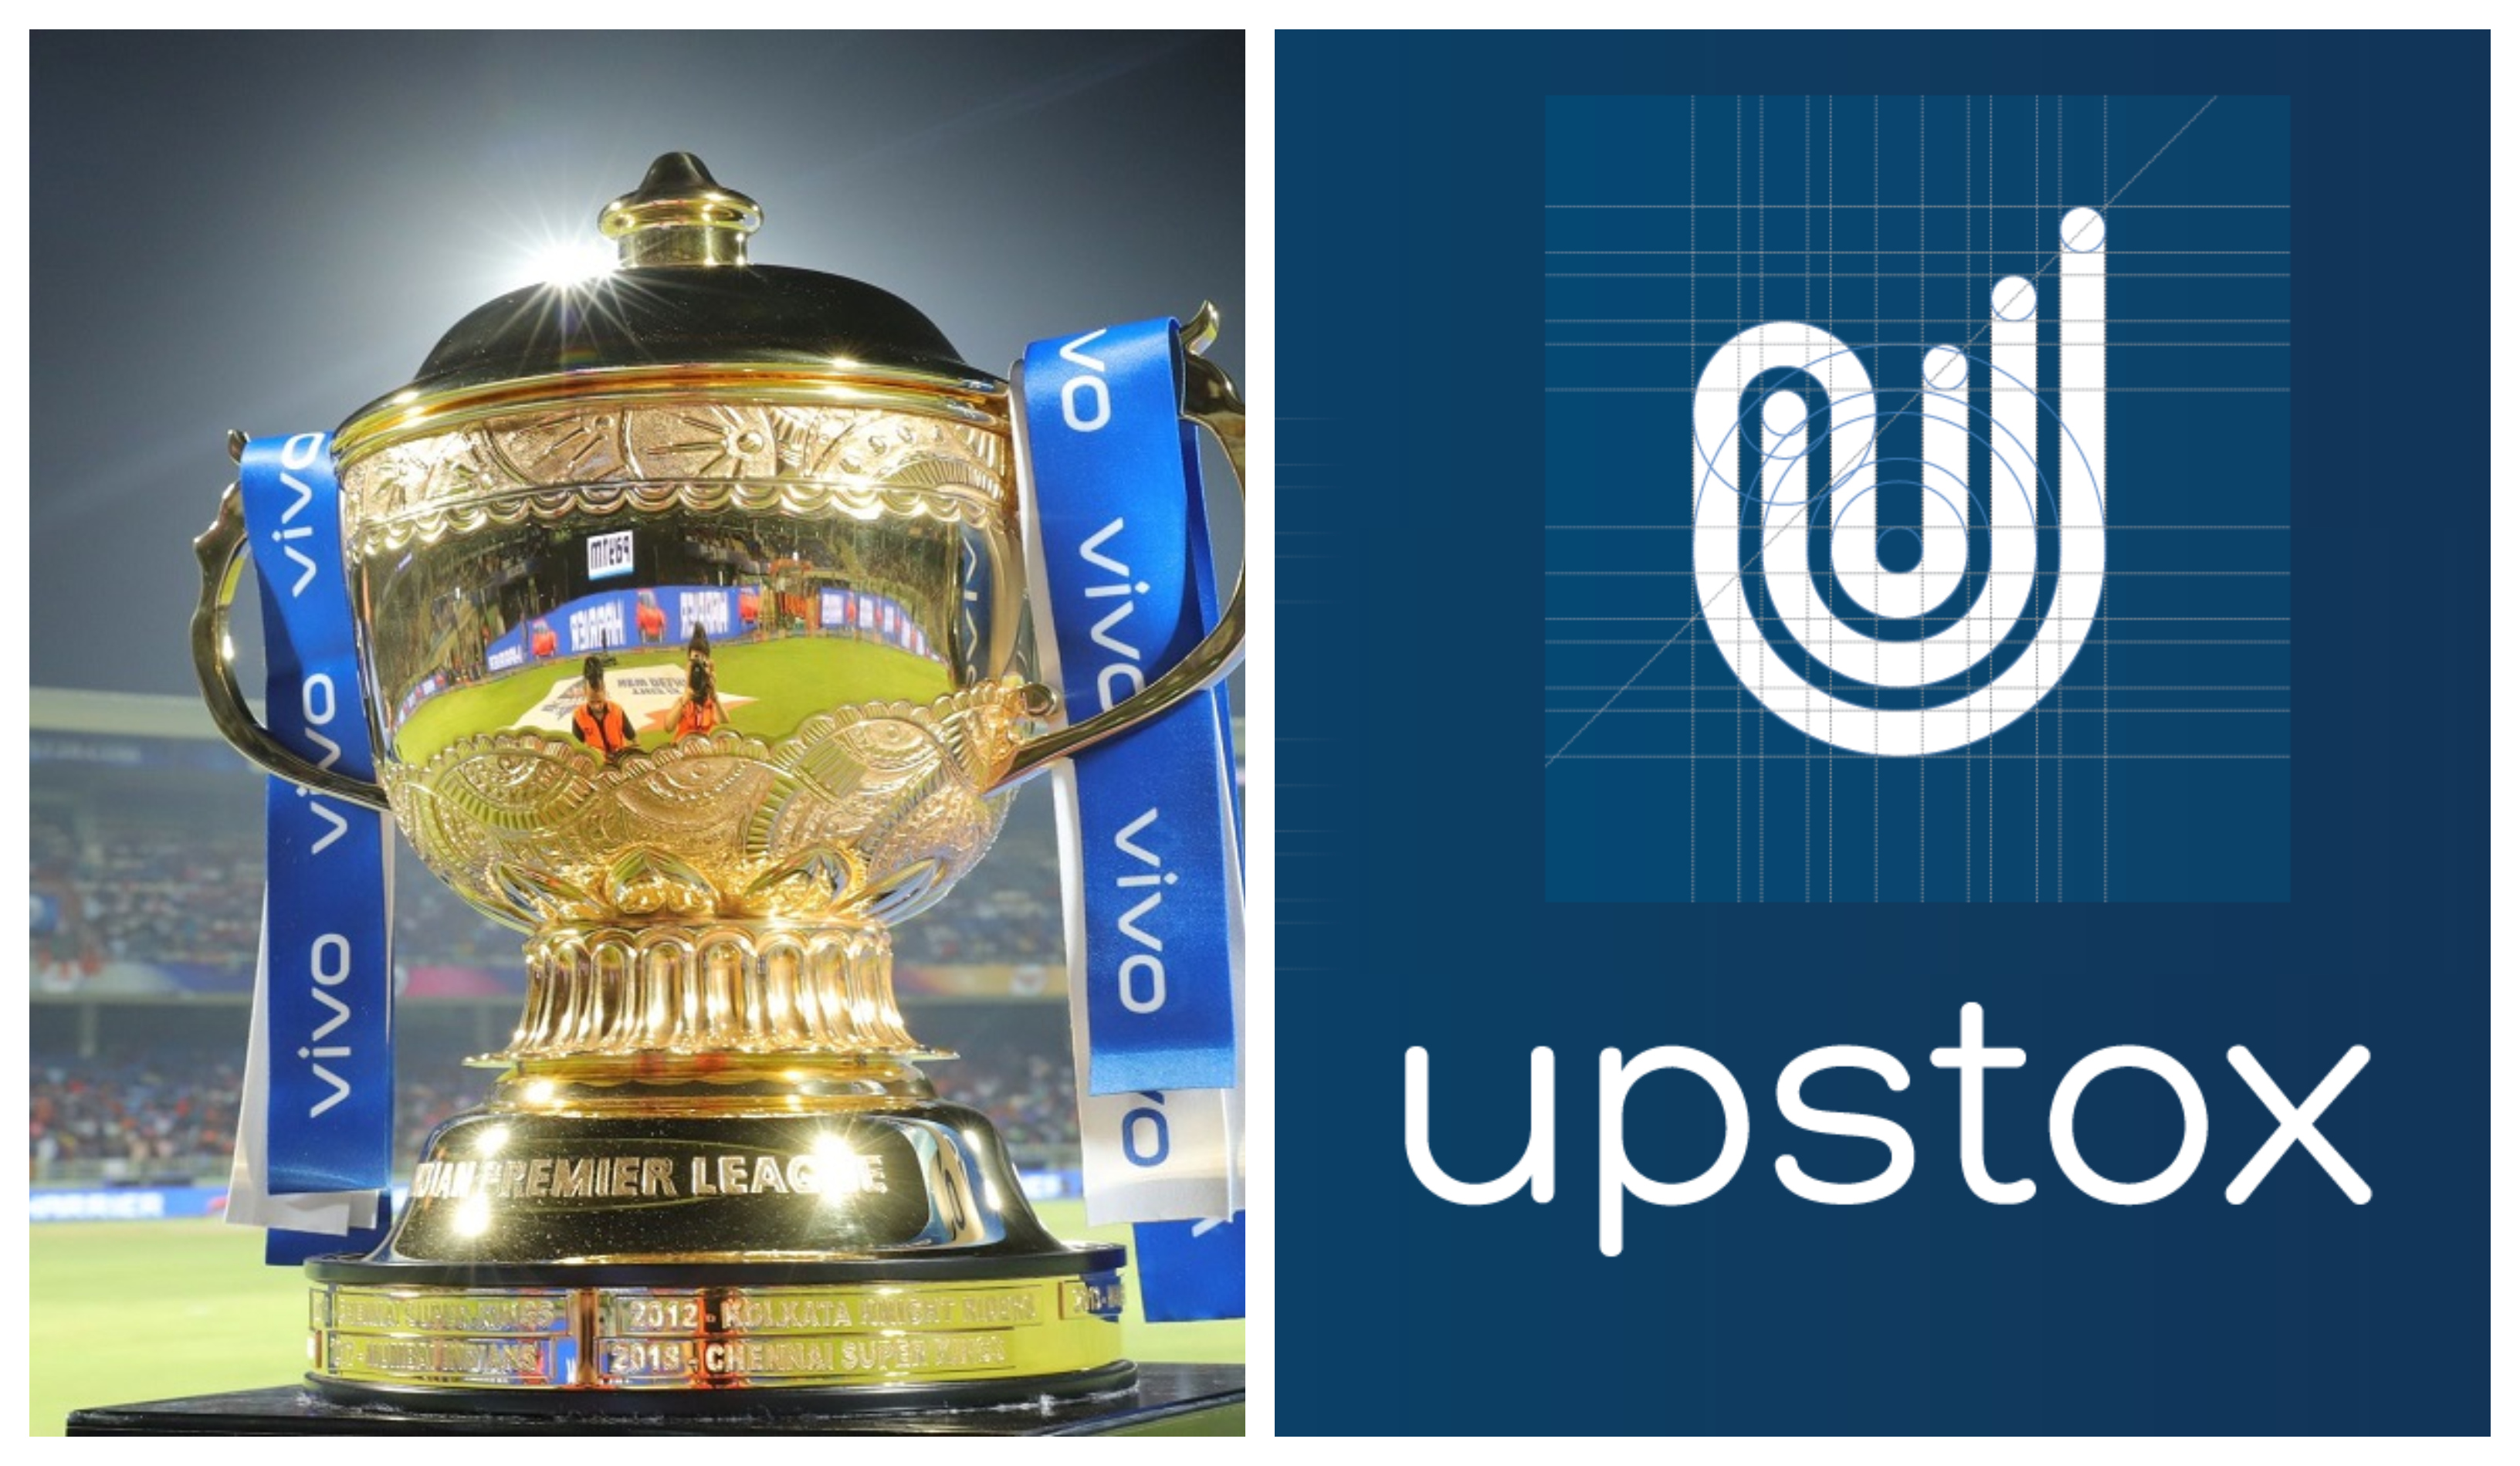 The IPL 2021 begins from April 9 and Upstox was announced as the new partner by BCCI